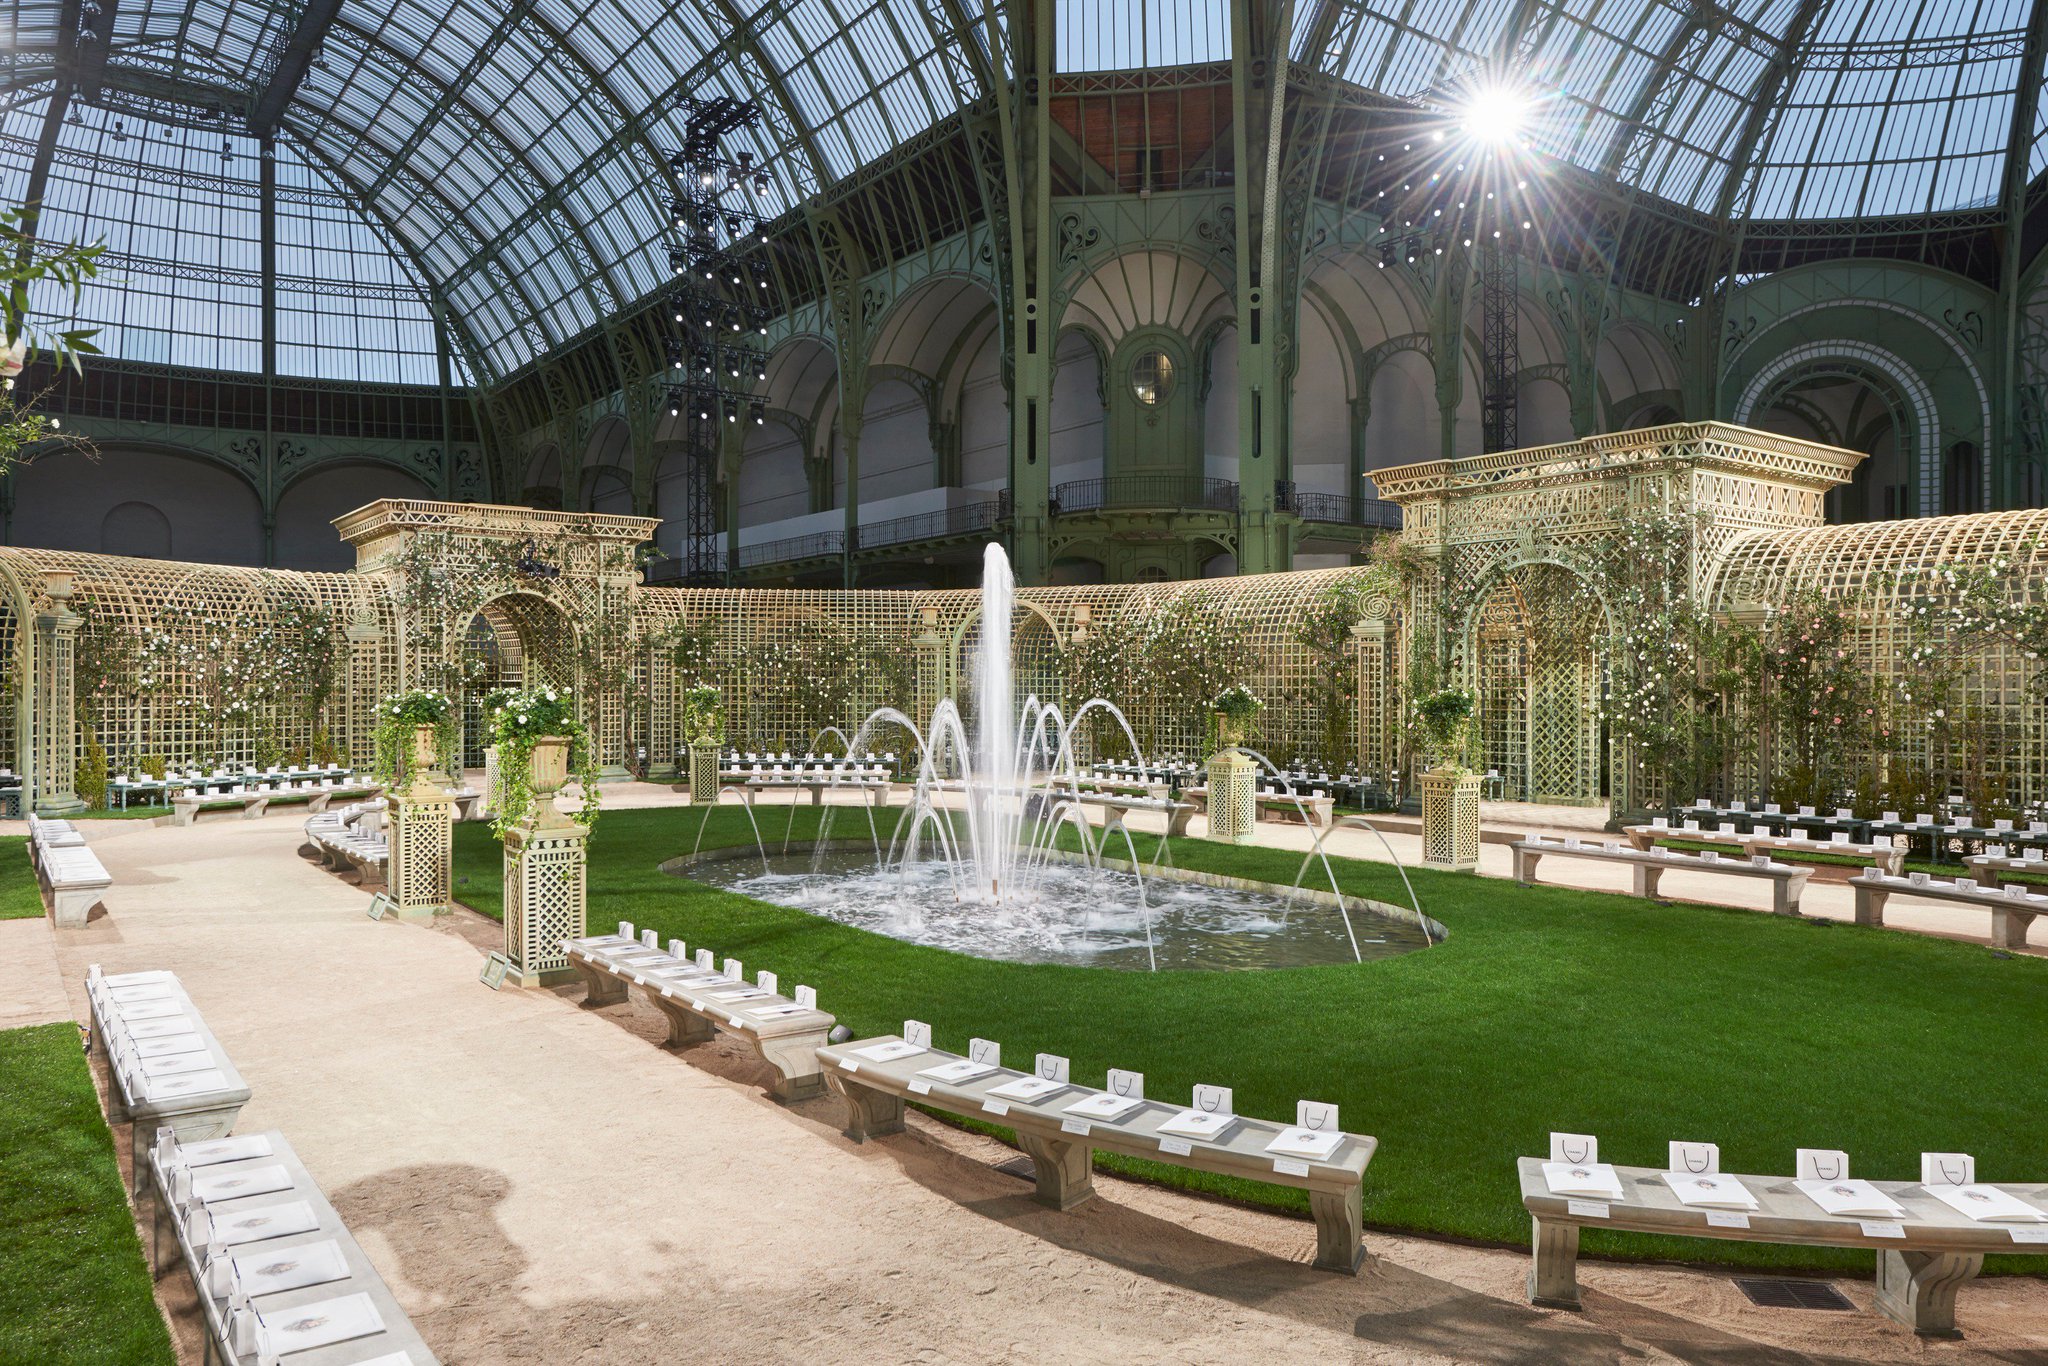 CHANEL on X: The decor imagined by Karl Lagerfeld for the Spring-Summer  2018 #CHANELHauteCouture show in Paris, evokes French formal gardens.   / X